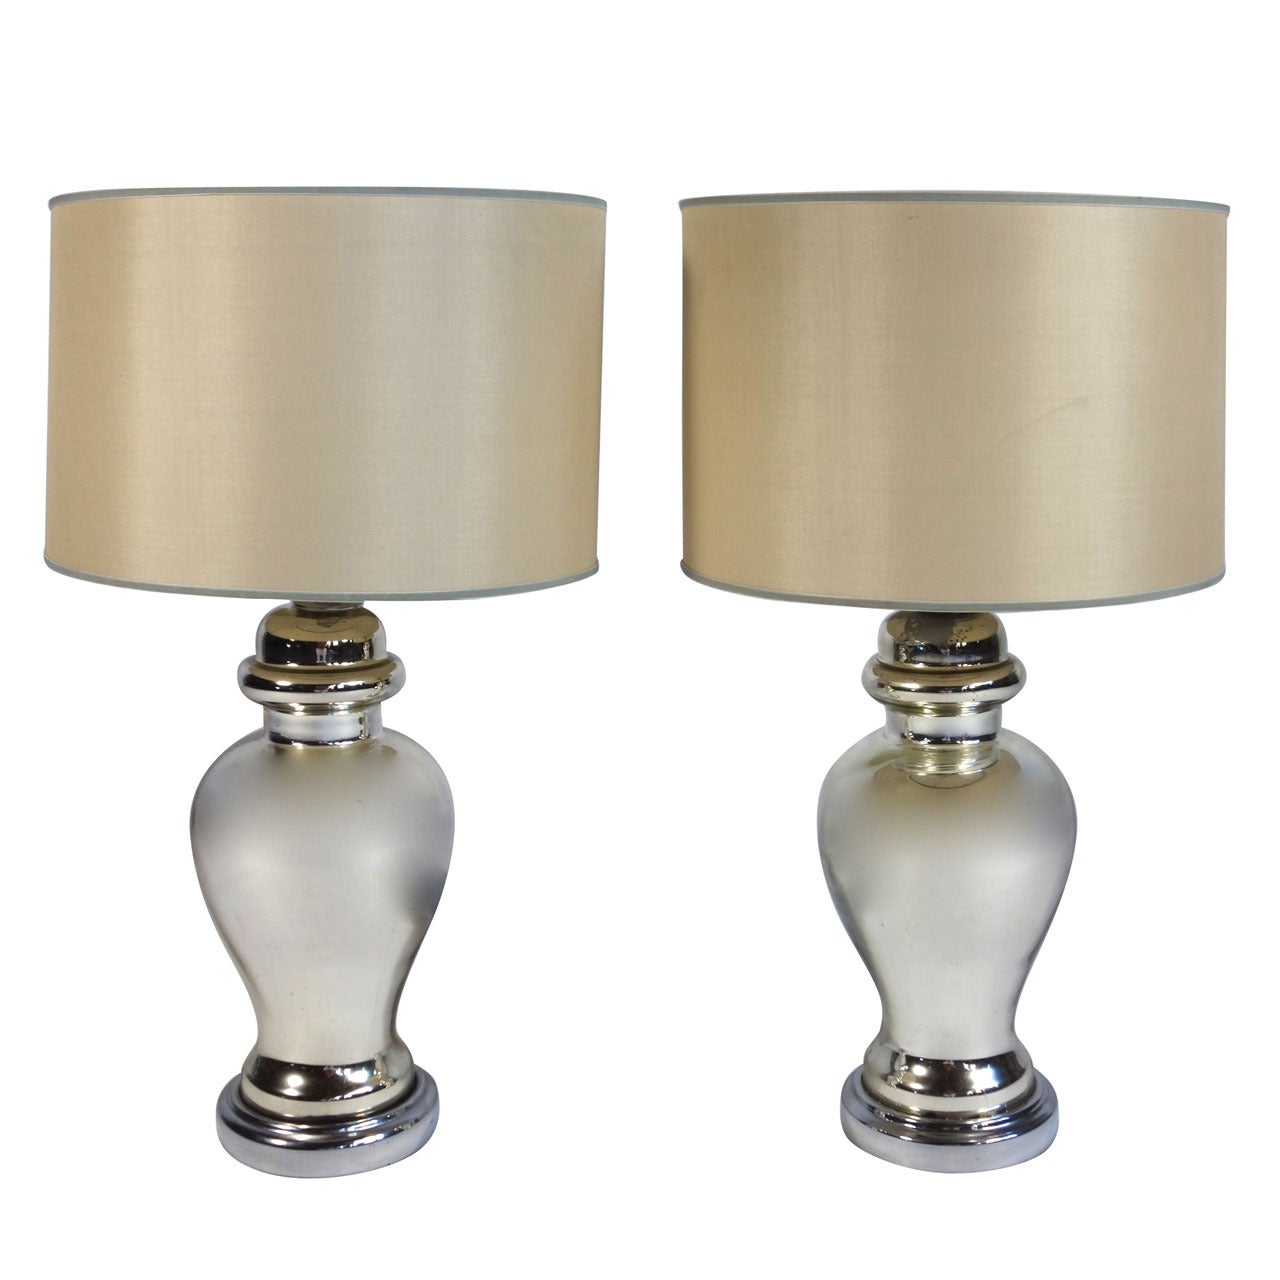 Pair of Mercury Glass Lamps, Aileen Getty Collection For Sale